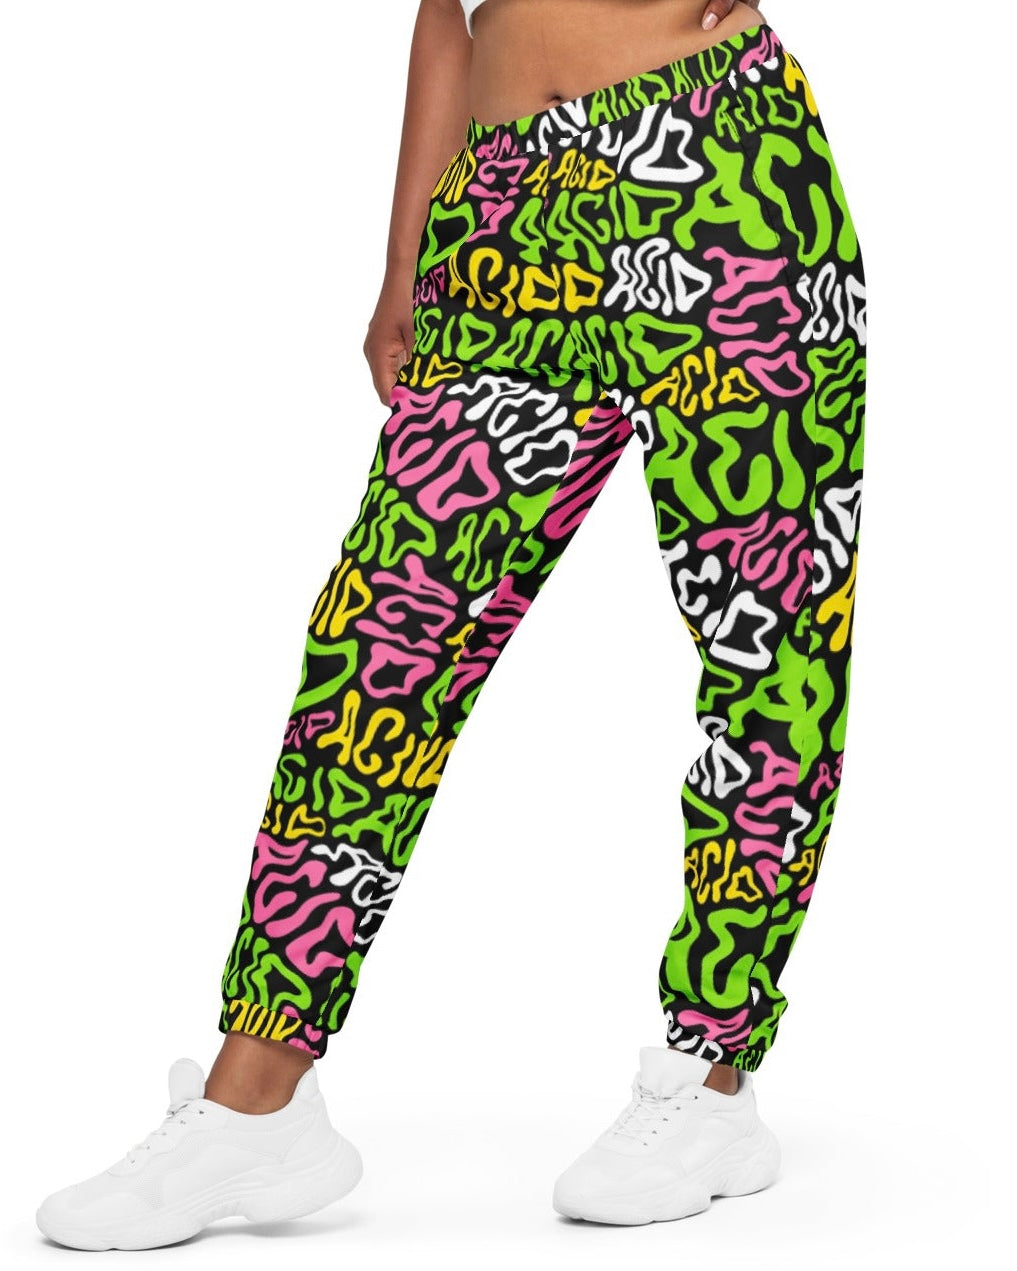 Candy Acid Track Pants, Track Pants, - One Stop Rave